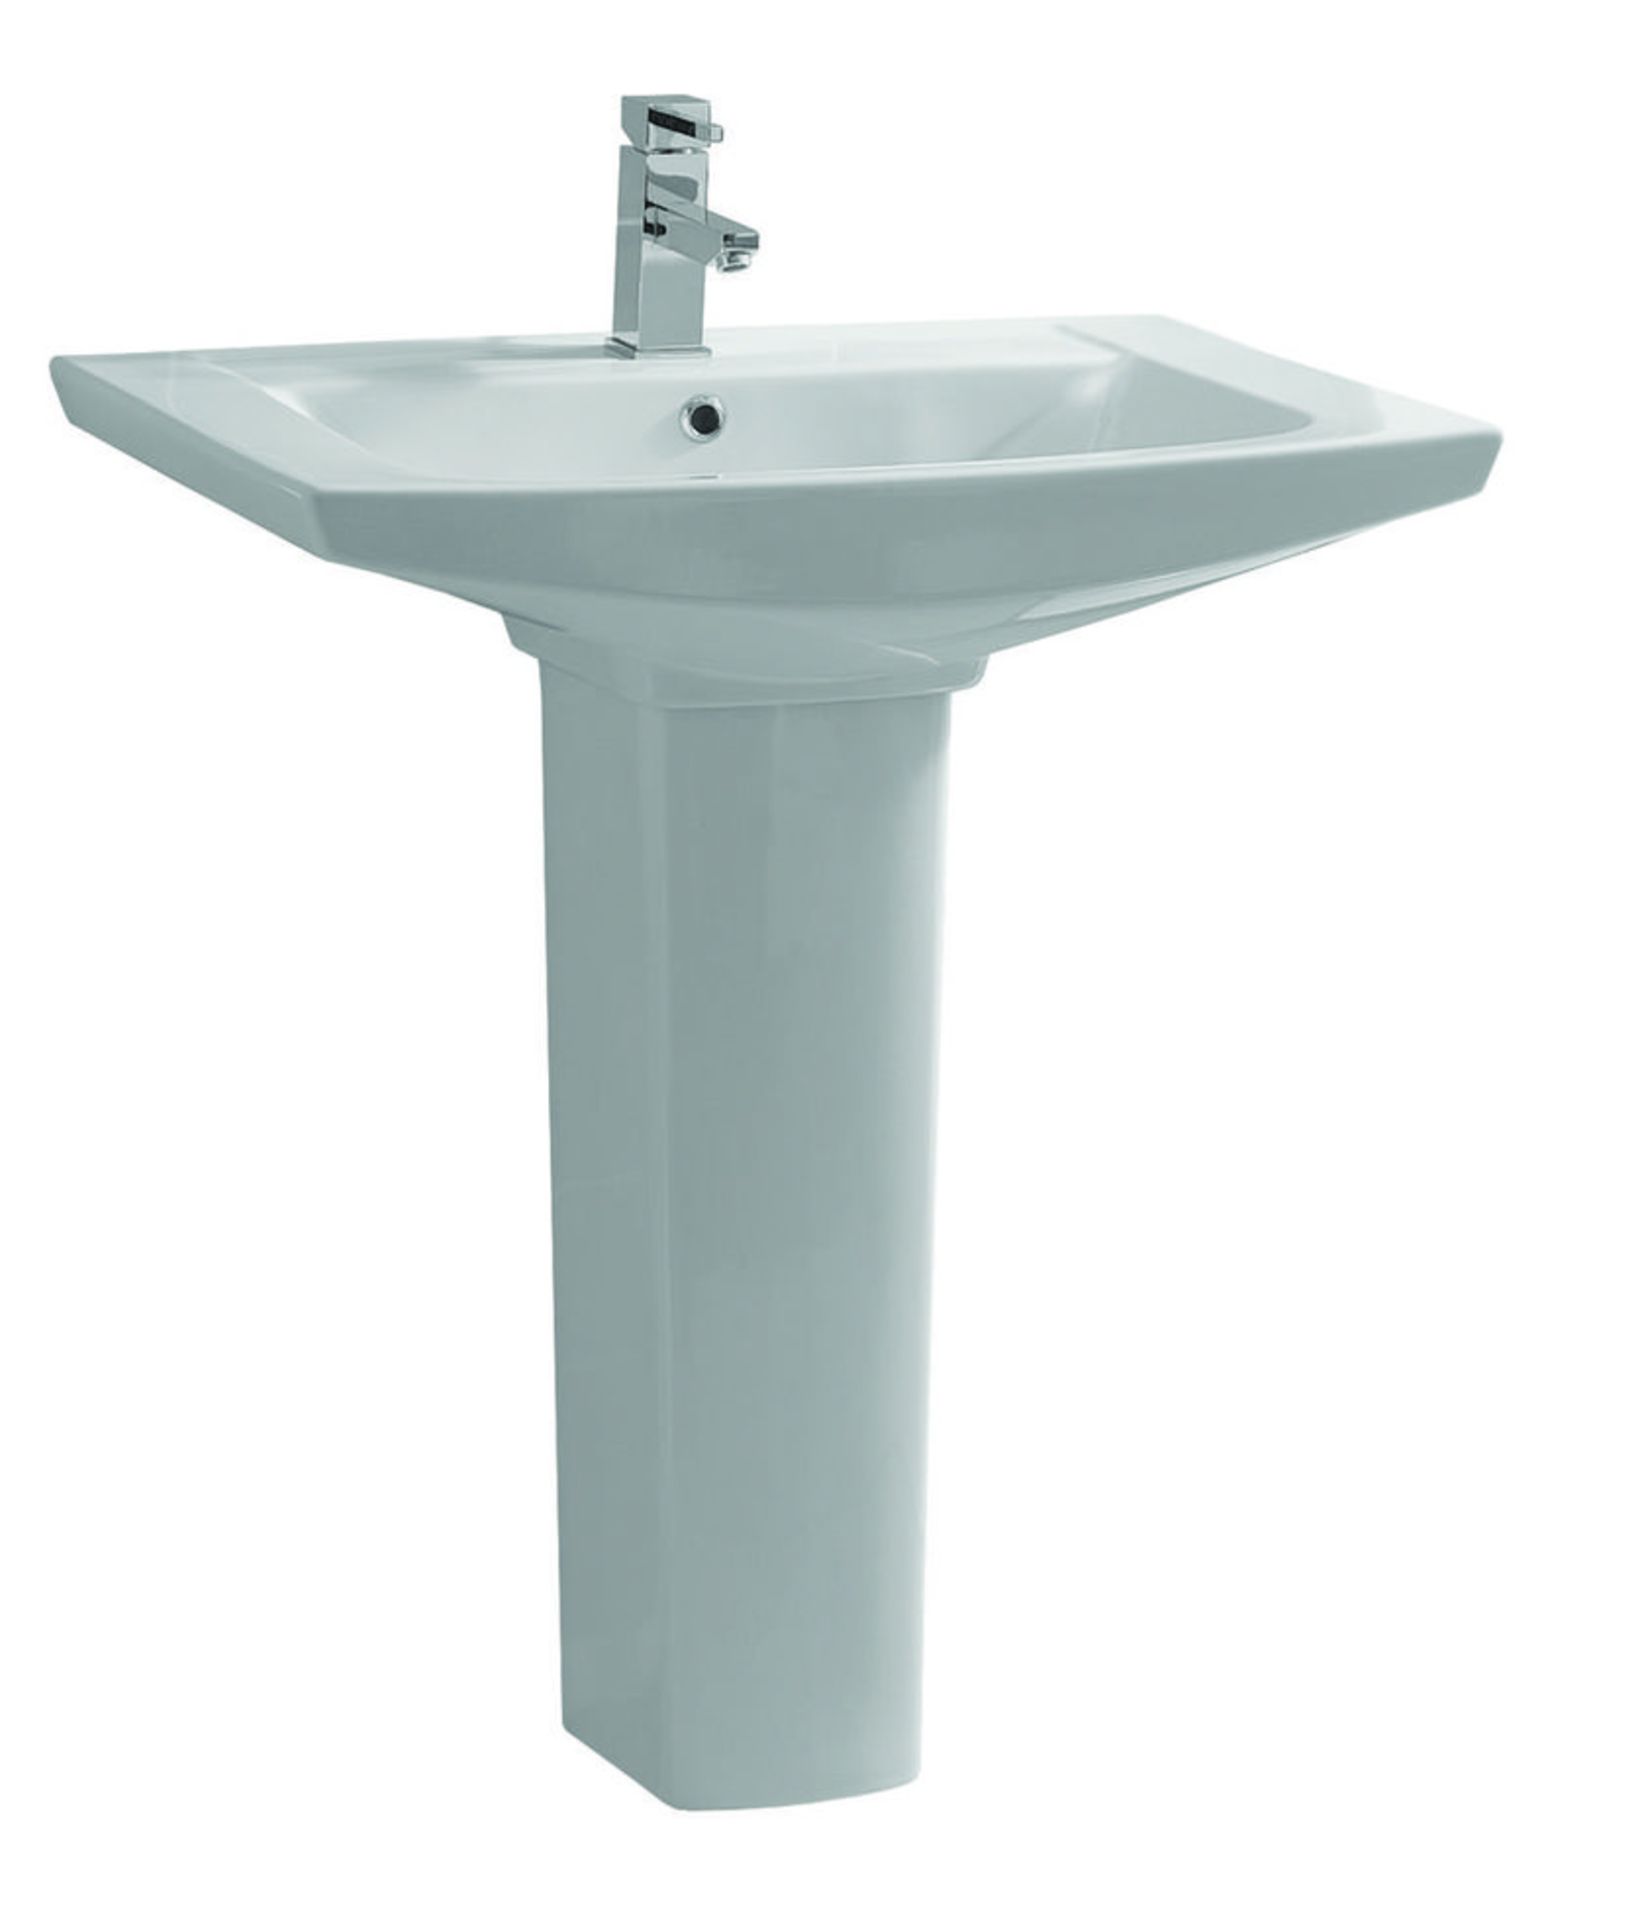 4 x Vogue Bathrooms CAPRICE Single Tap Hole SINK BASINS With Full Pedestals - Vogue Bathrooms - - Image 2 of 2